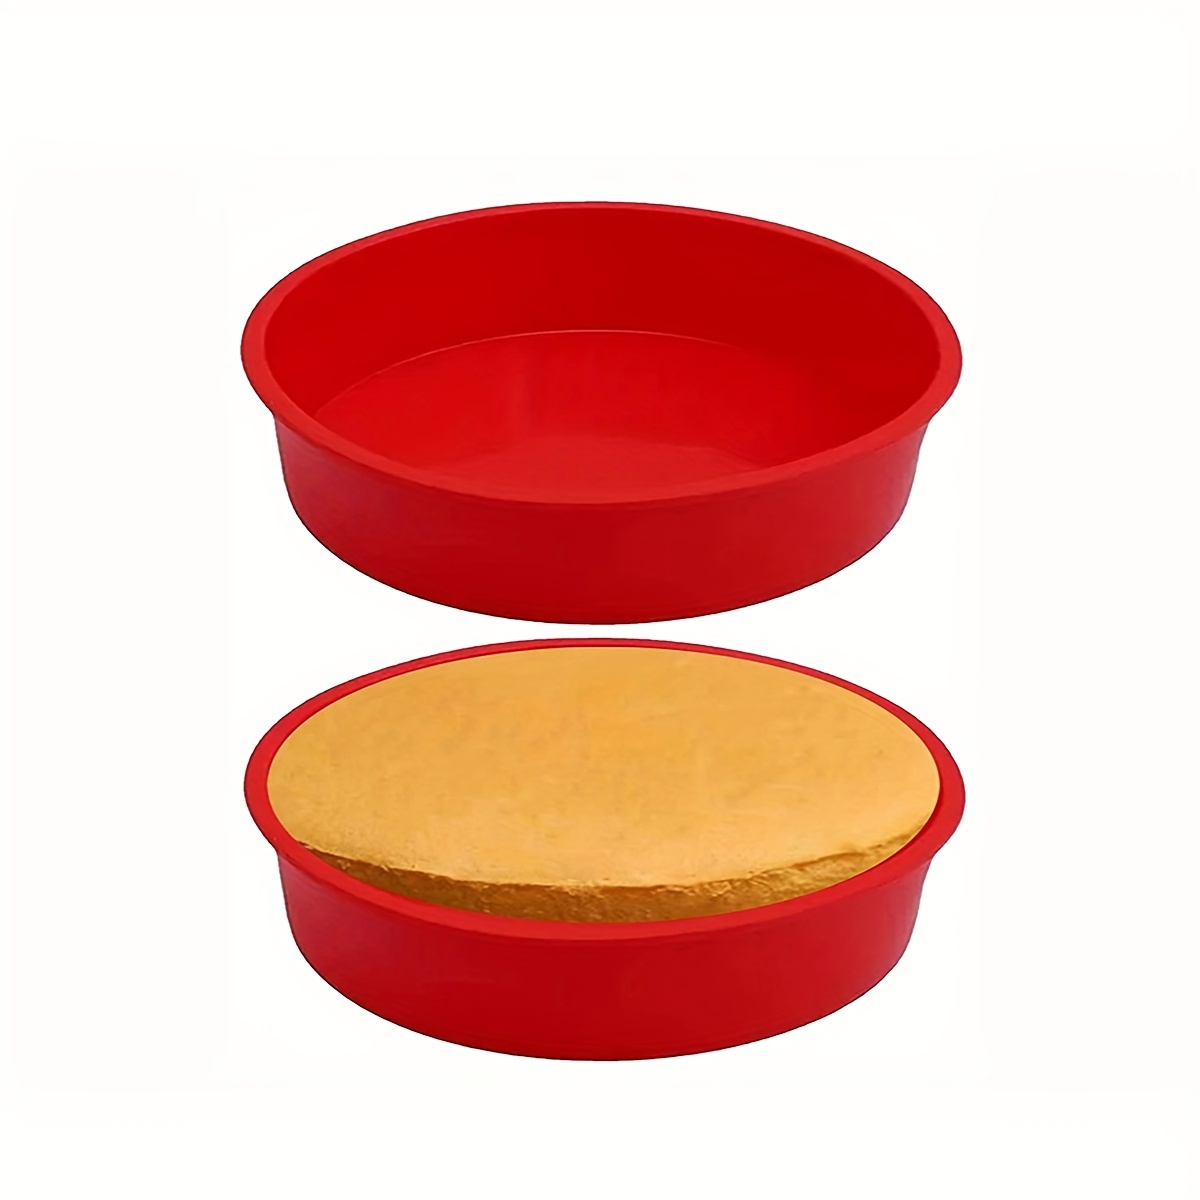 SILIVO 9 inch Round Cake Pans - Set of 2 Silicone Molds for Baking